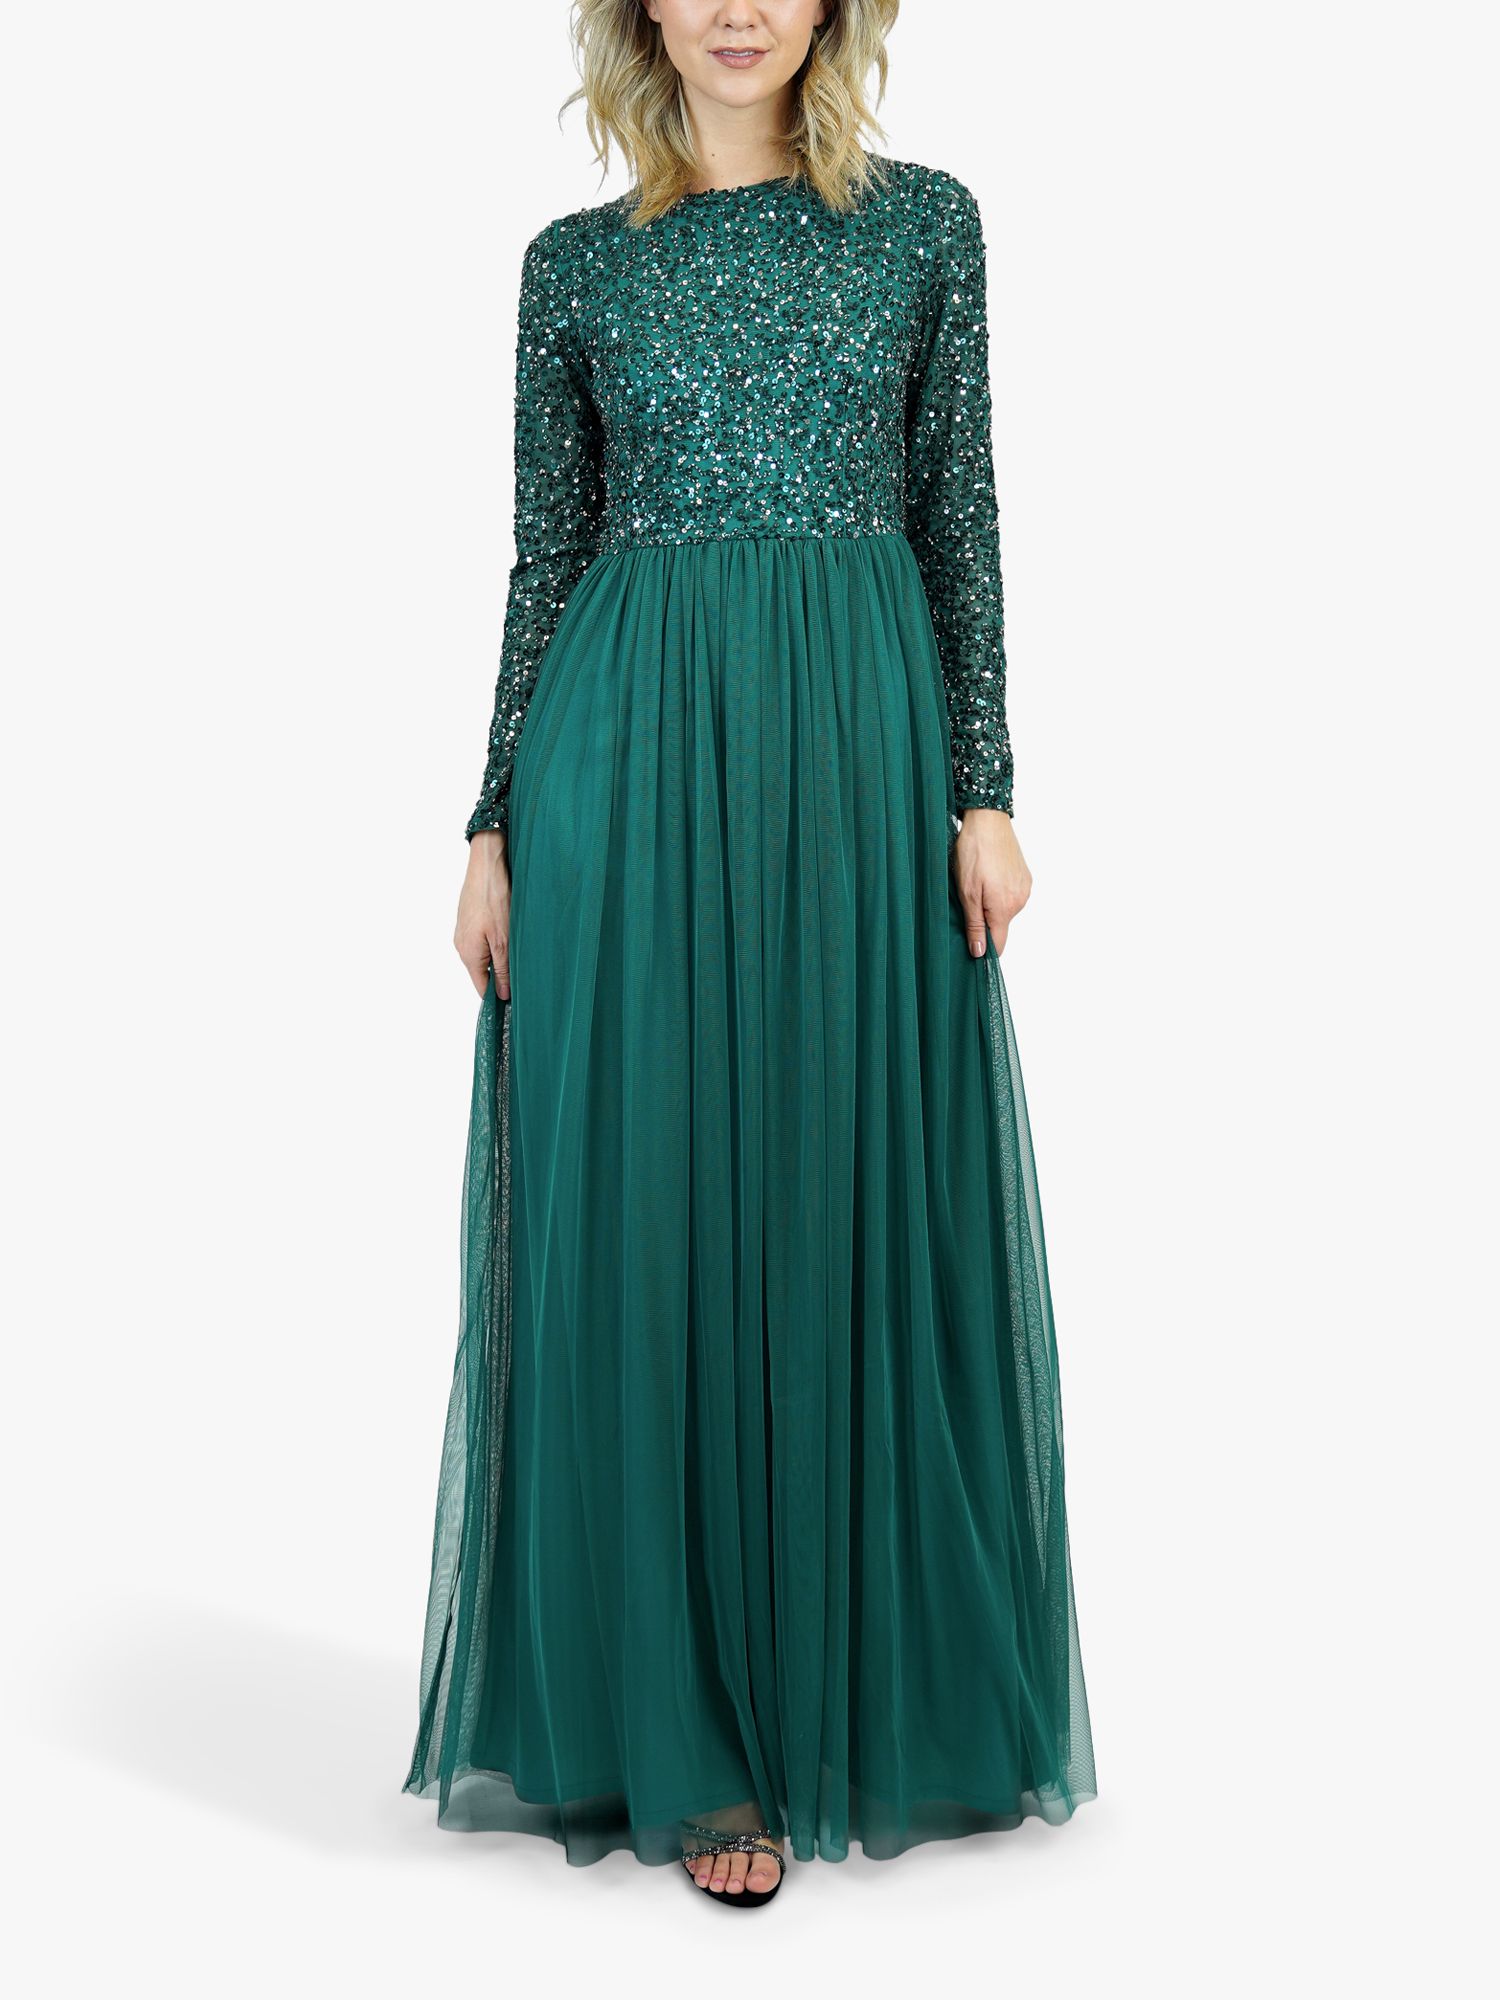 Buy Lace & Beads Belle Sequin Bodice Maxi Dress, Emerald Green Online at johnlewis.com